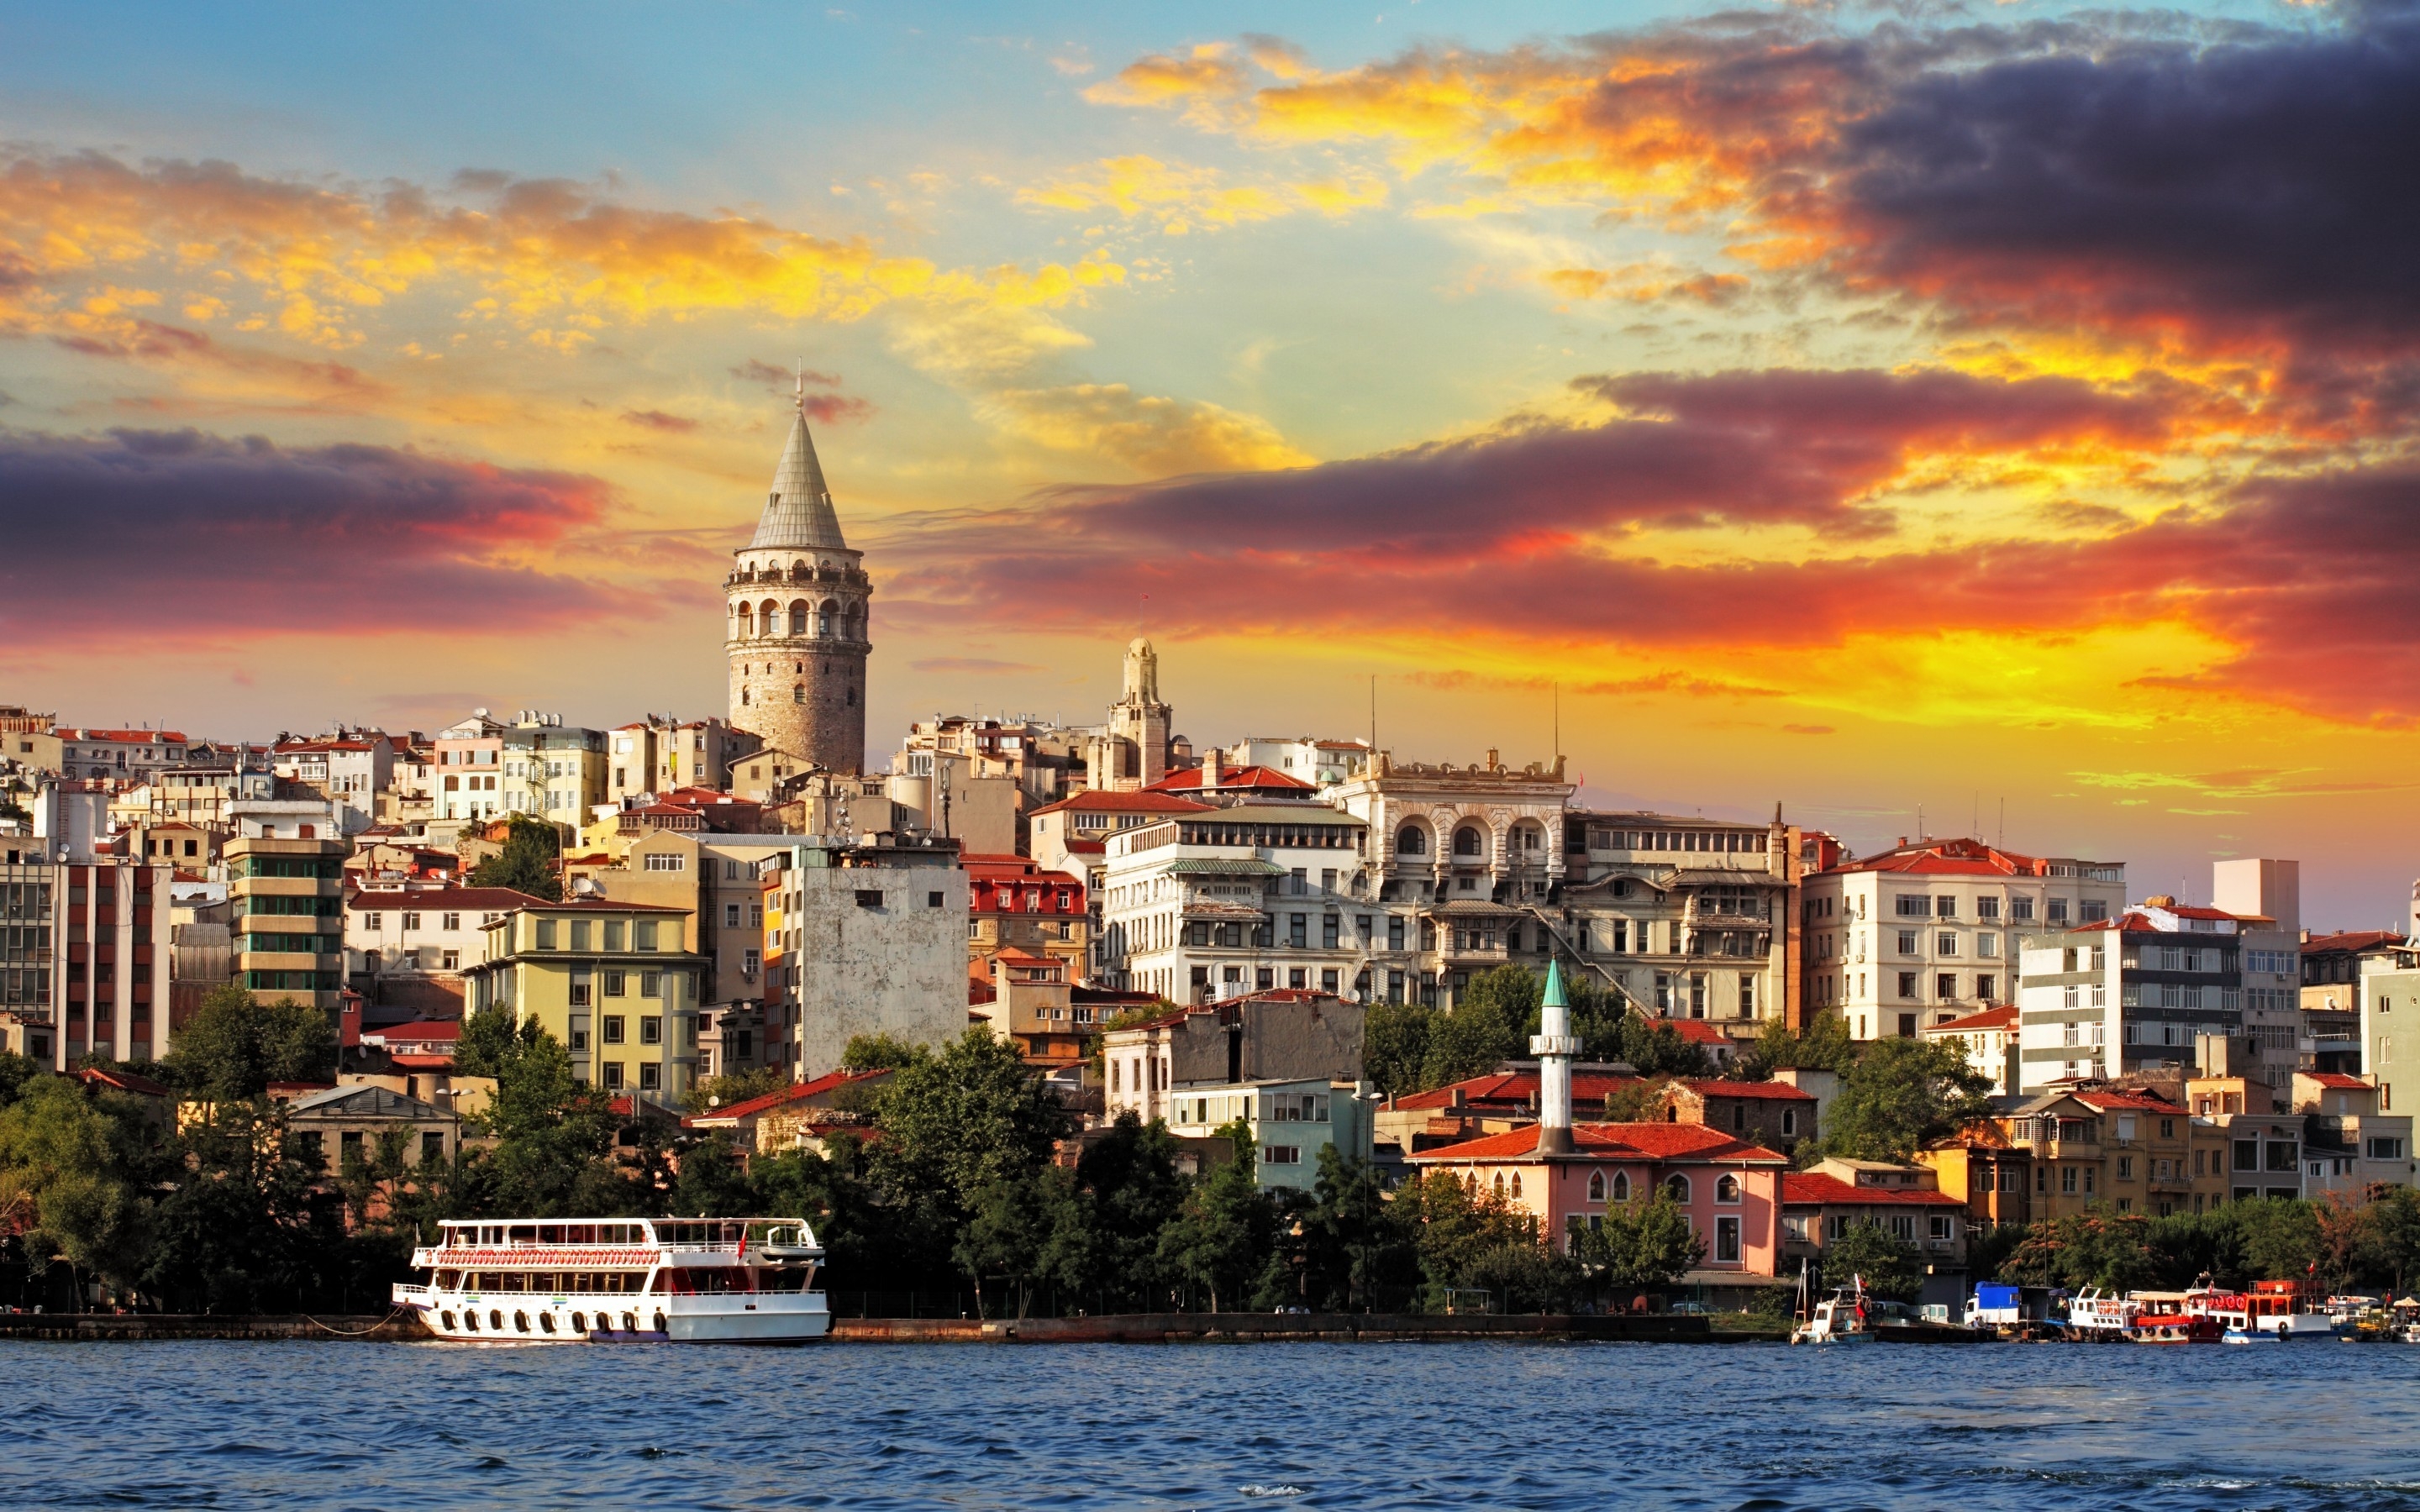 Sunset in Istambul for 2880 x 1800 Retina Display resolution